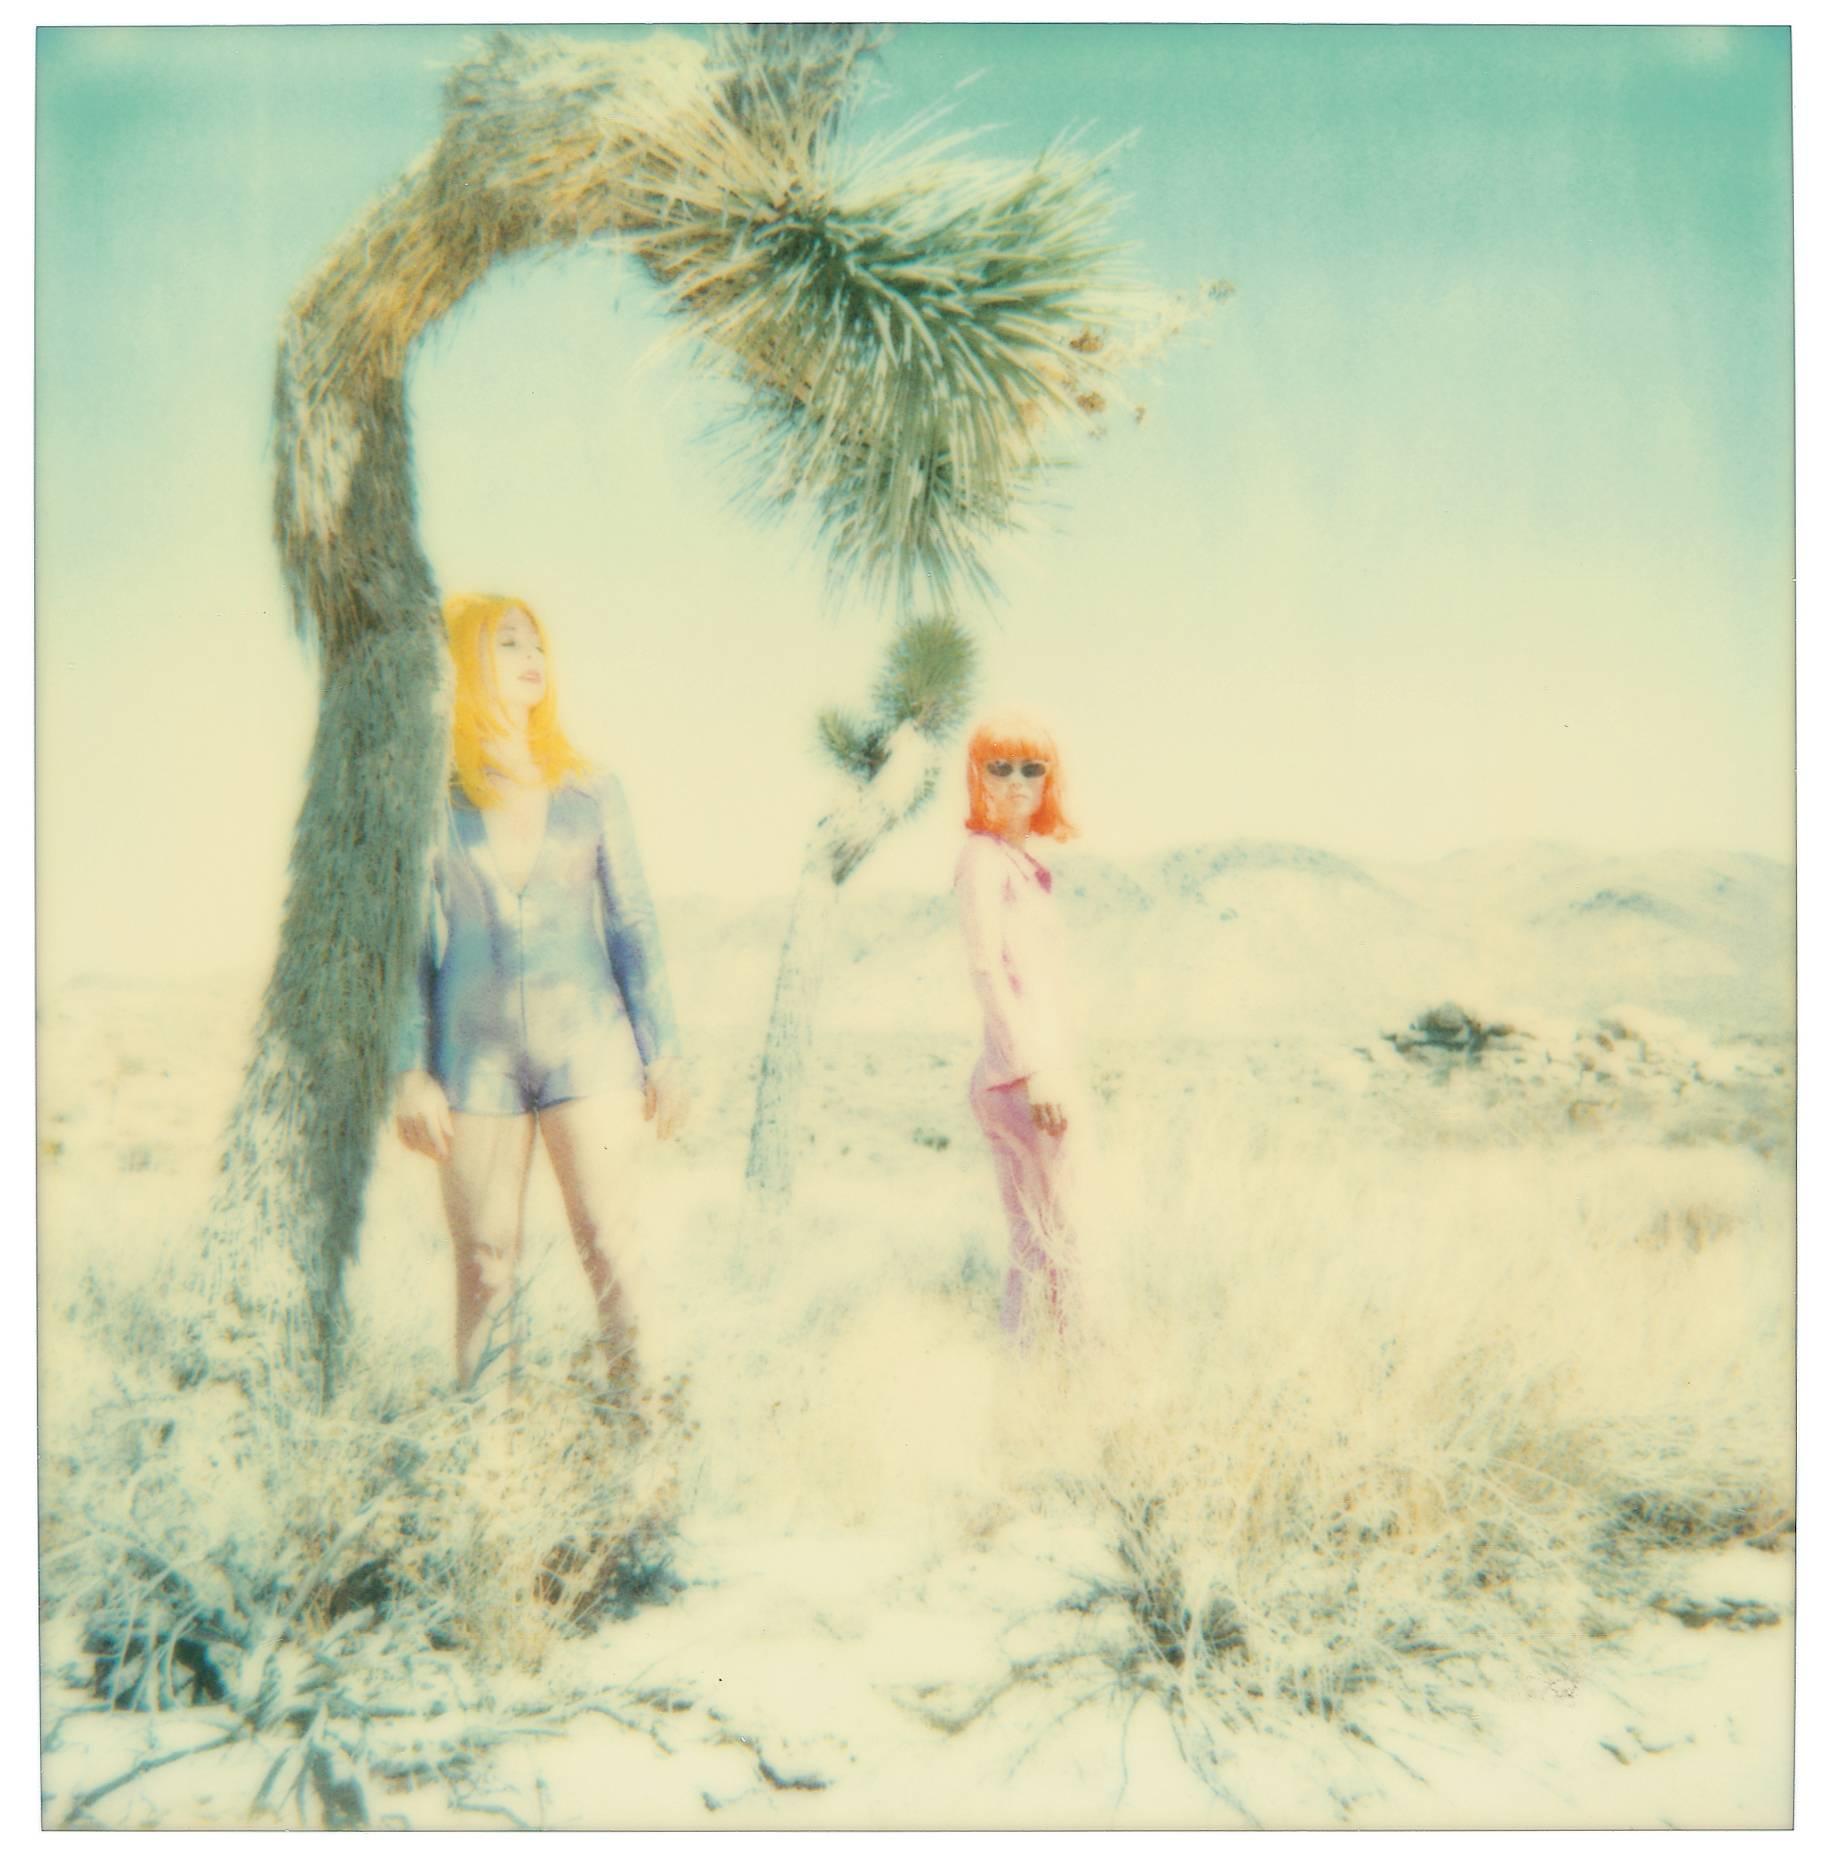 Stefanie Schneider Color Photograph - Long Way Home II, AP2/2, with Radha & Max, Color, Photography, Polaroid, expired